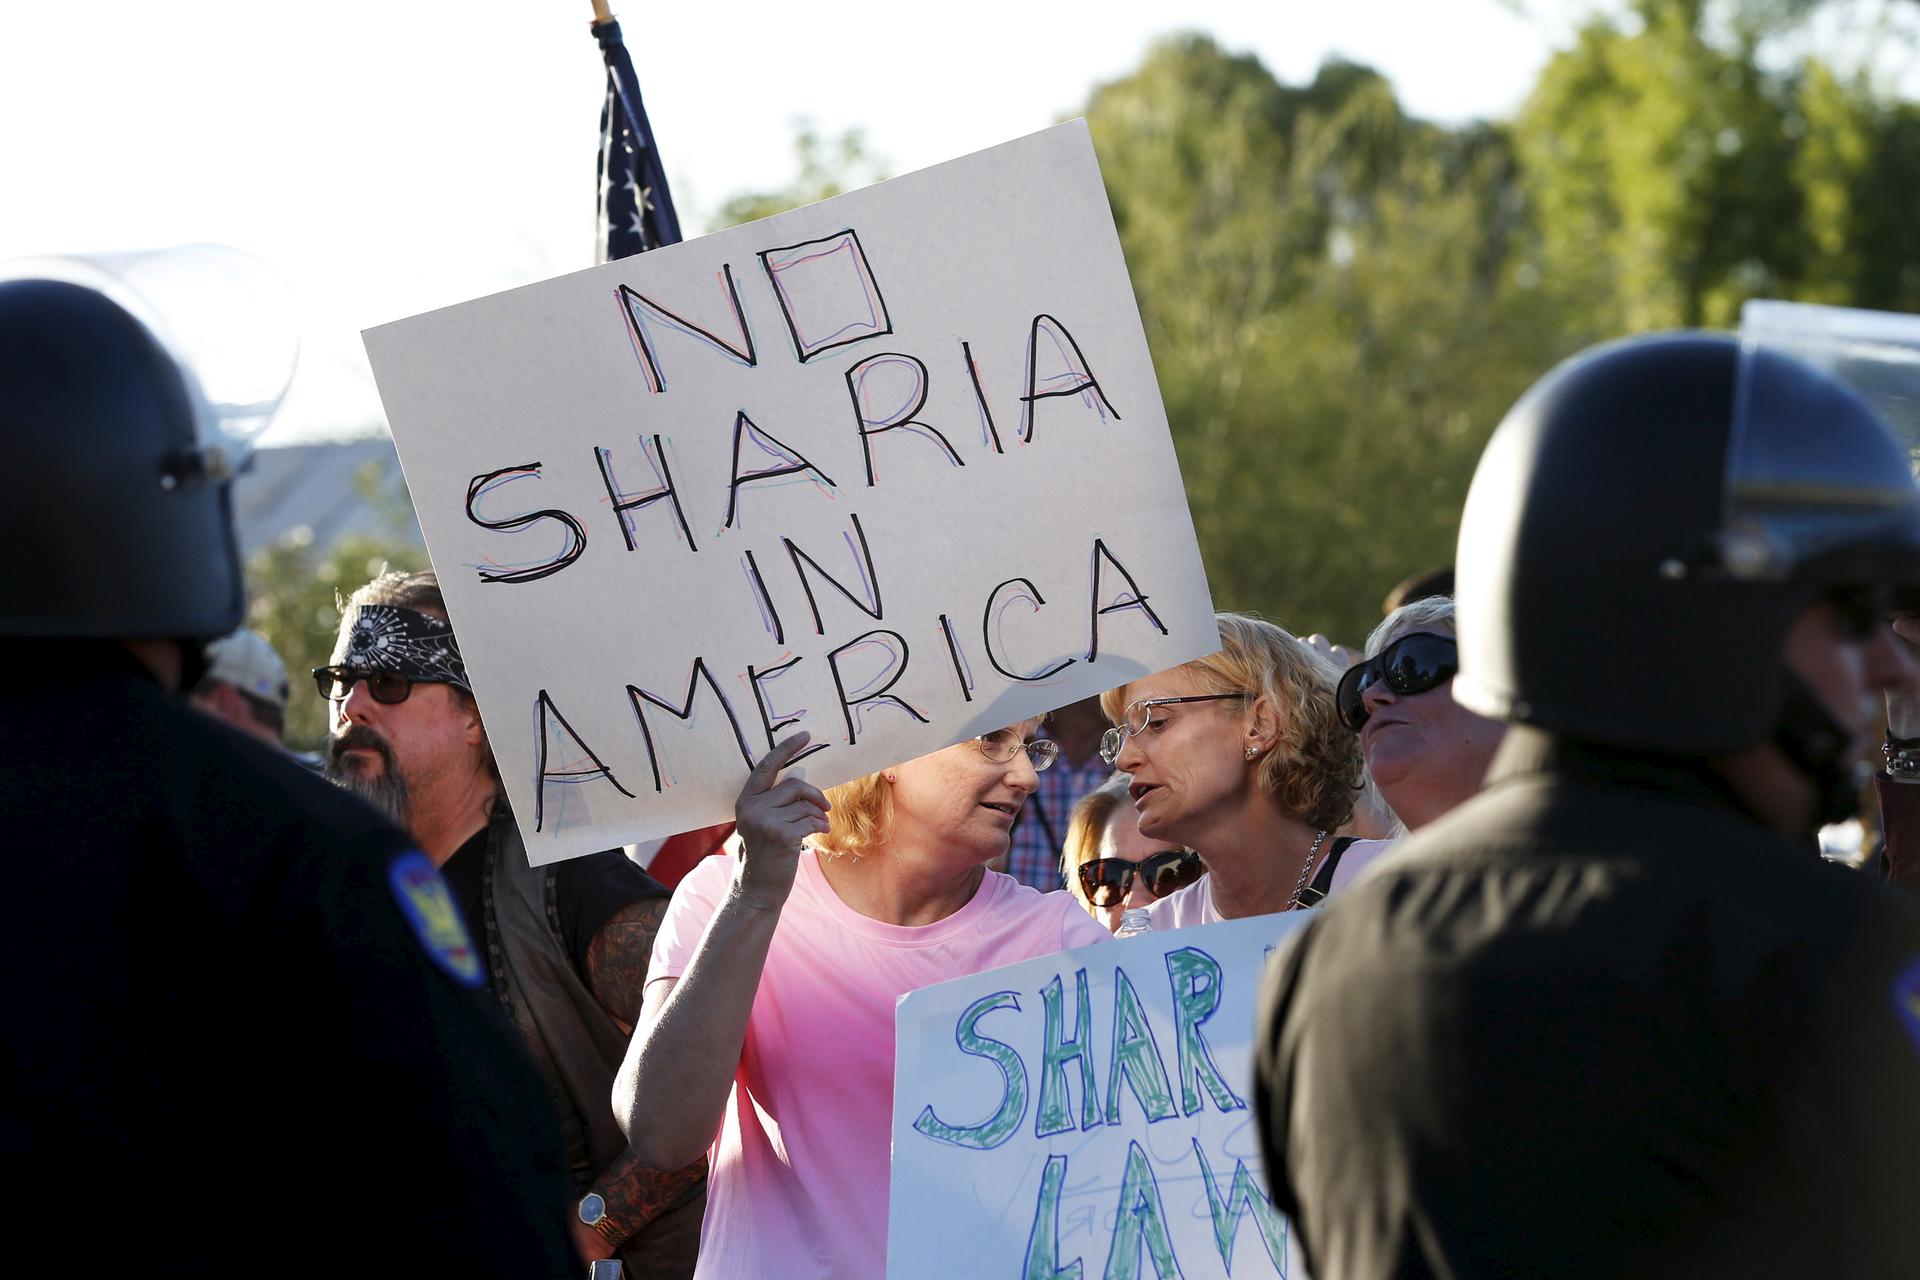 Anti-Muslim protesters at a rally in Phoenix, Arizona on May 29, 2015 pointed to Islamic sharia law as a problem for the United States. The sentiment is said to be a driving force behind failed legislation in Texas to ban foreign laws in American courts. 